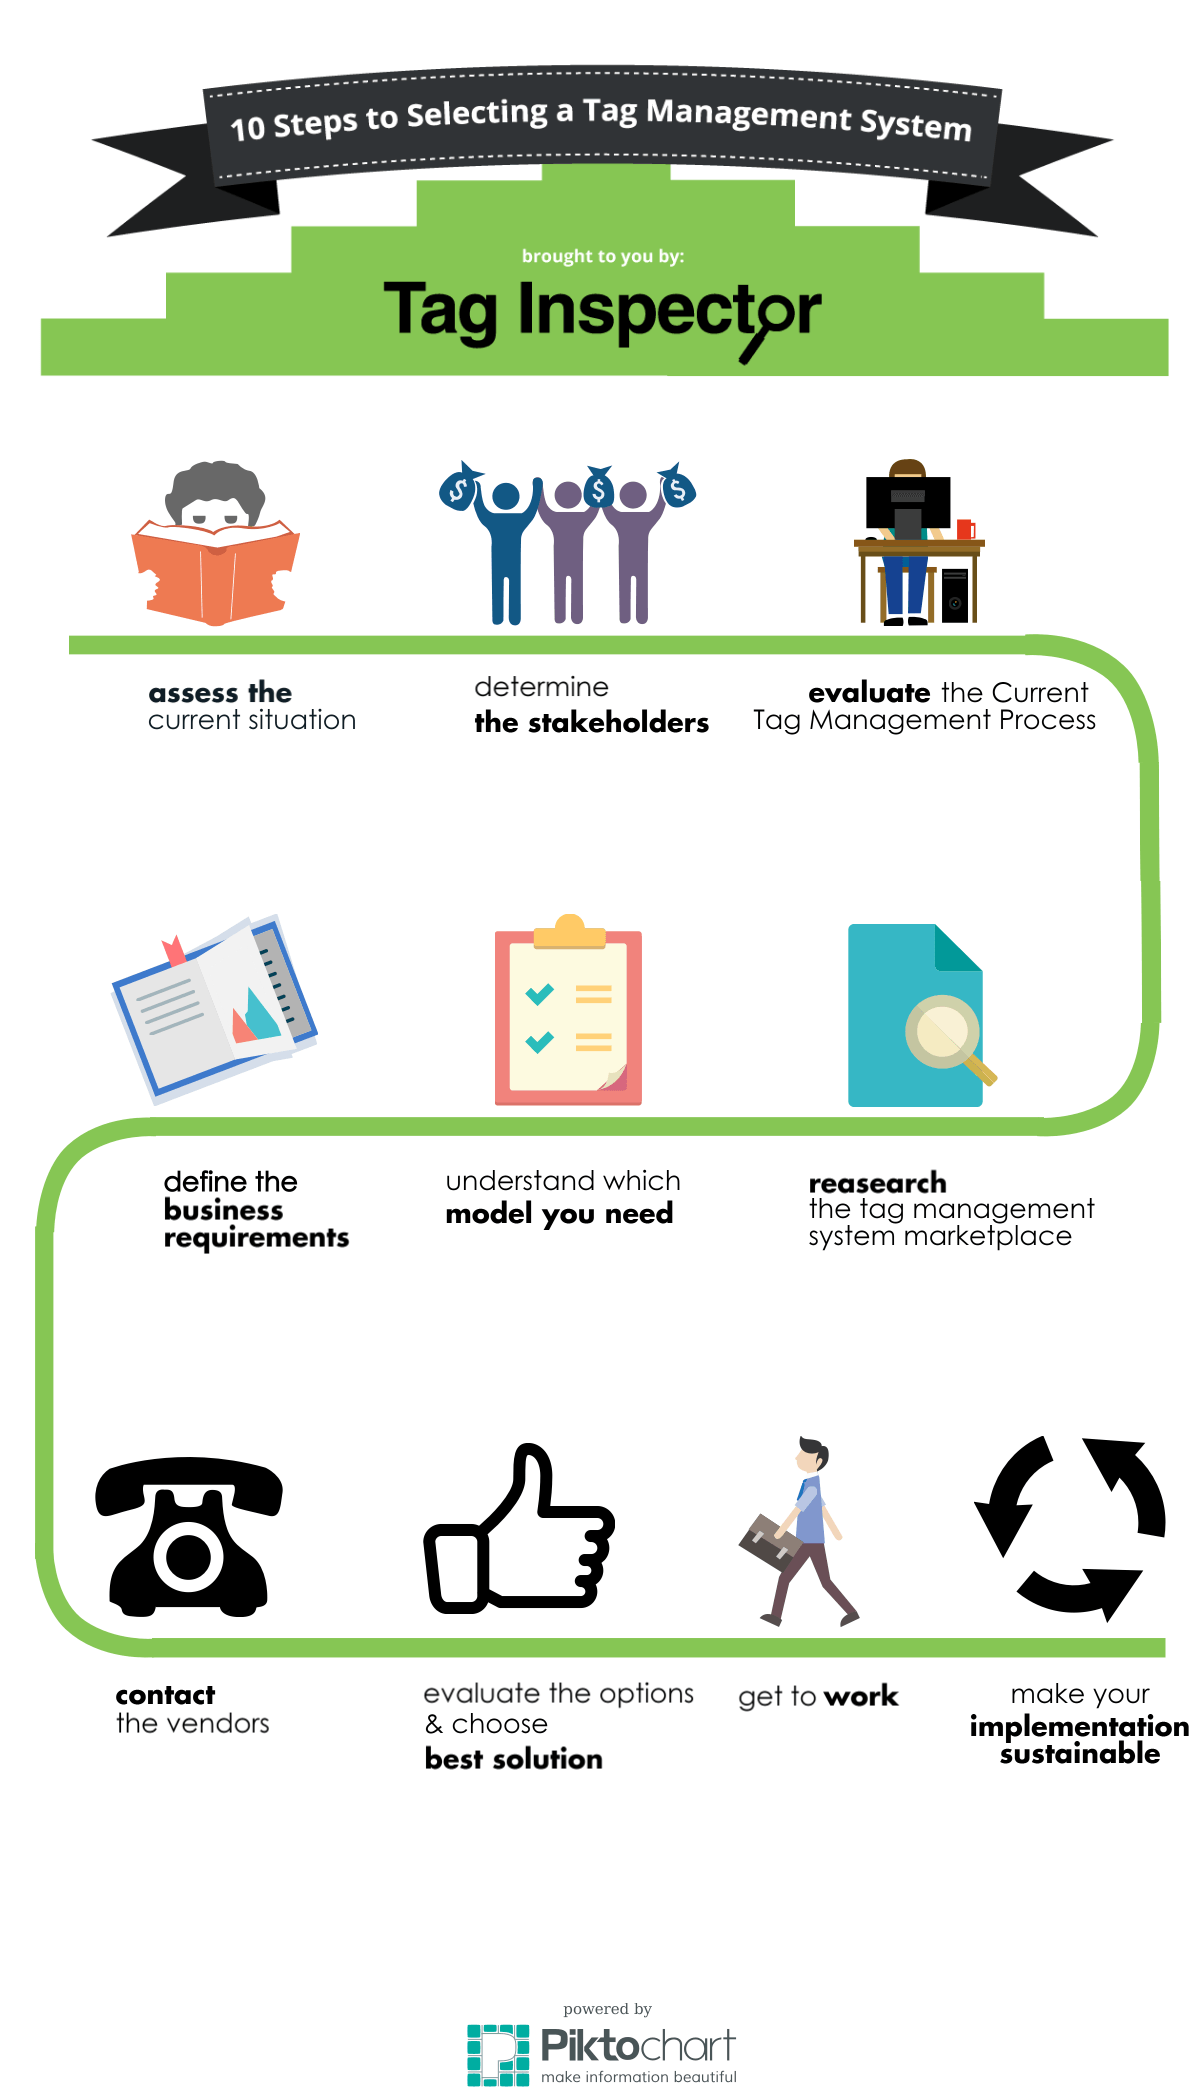 [Infographic] 10 Steps to Selecting a Tag Management System